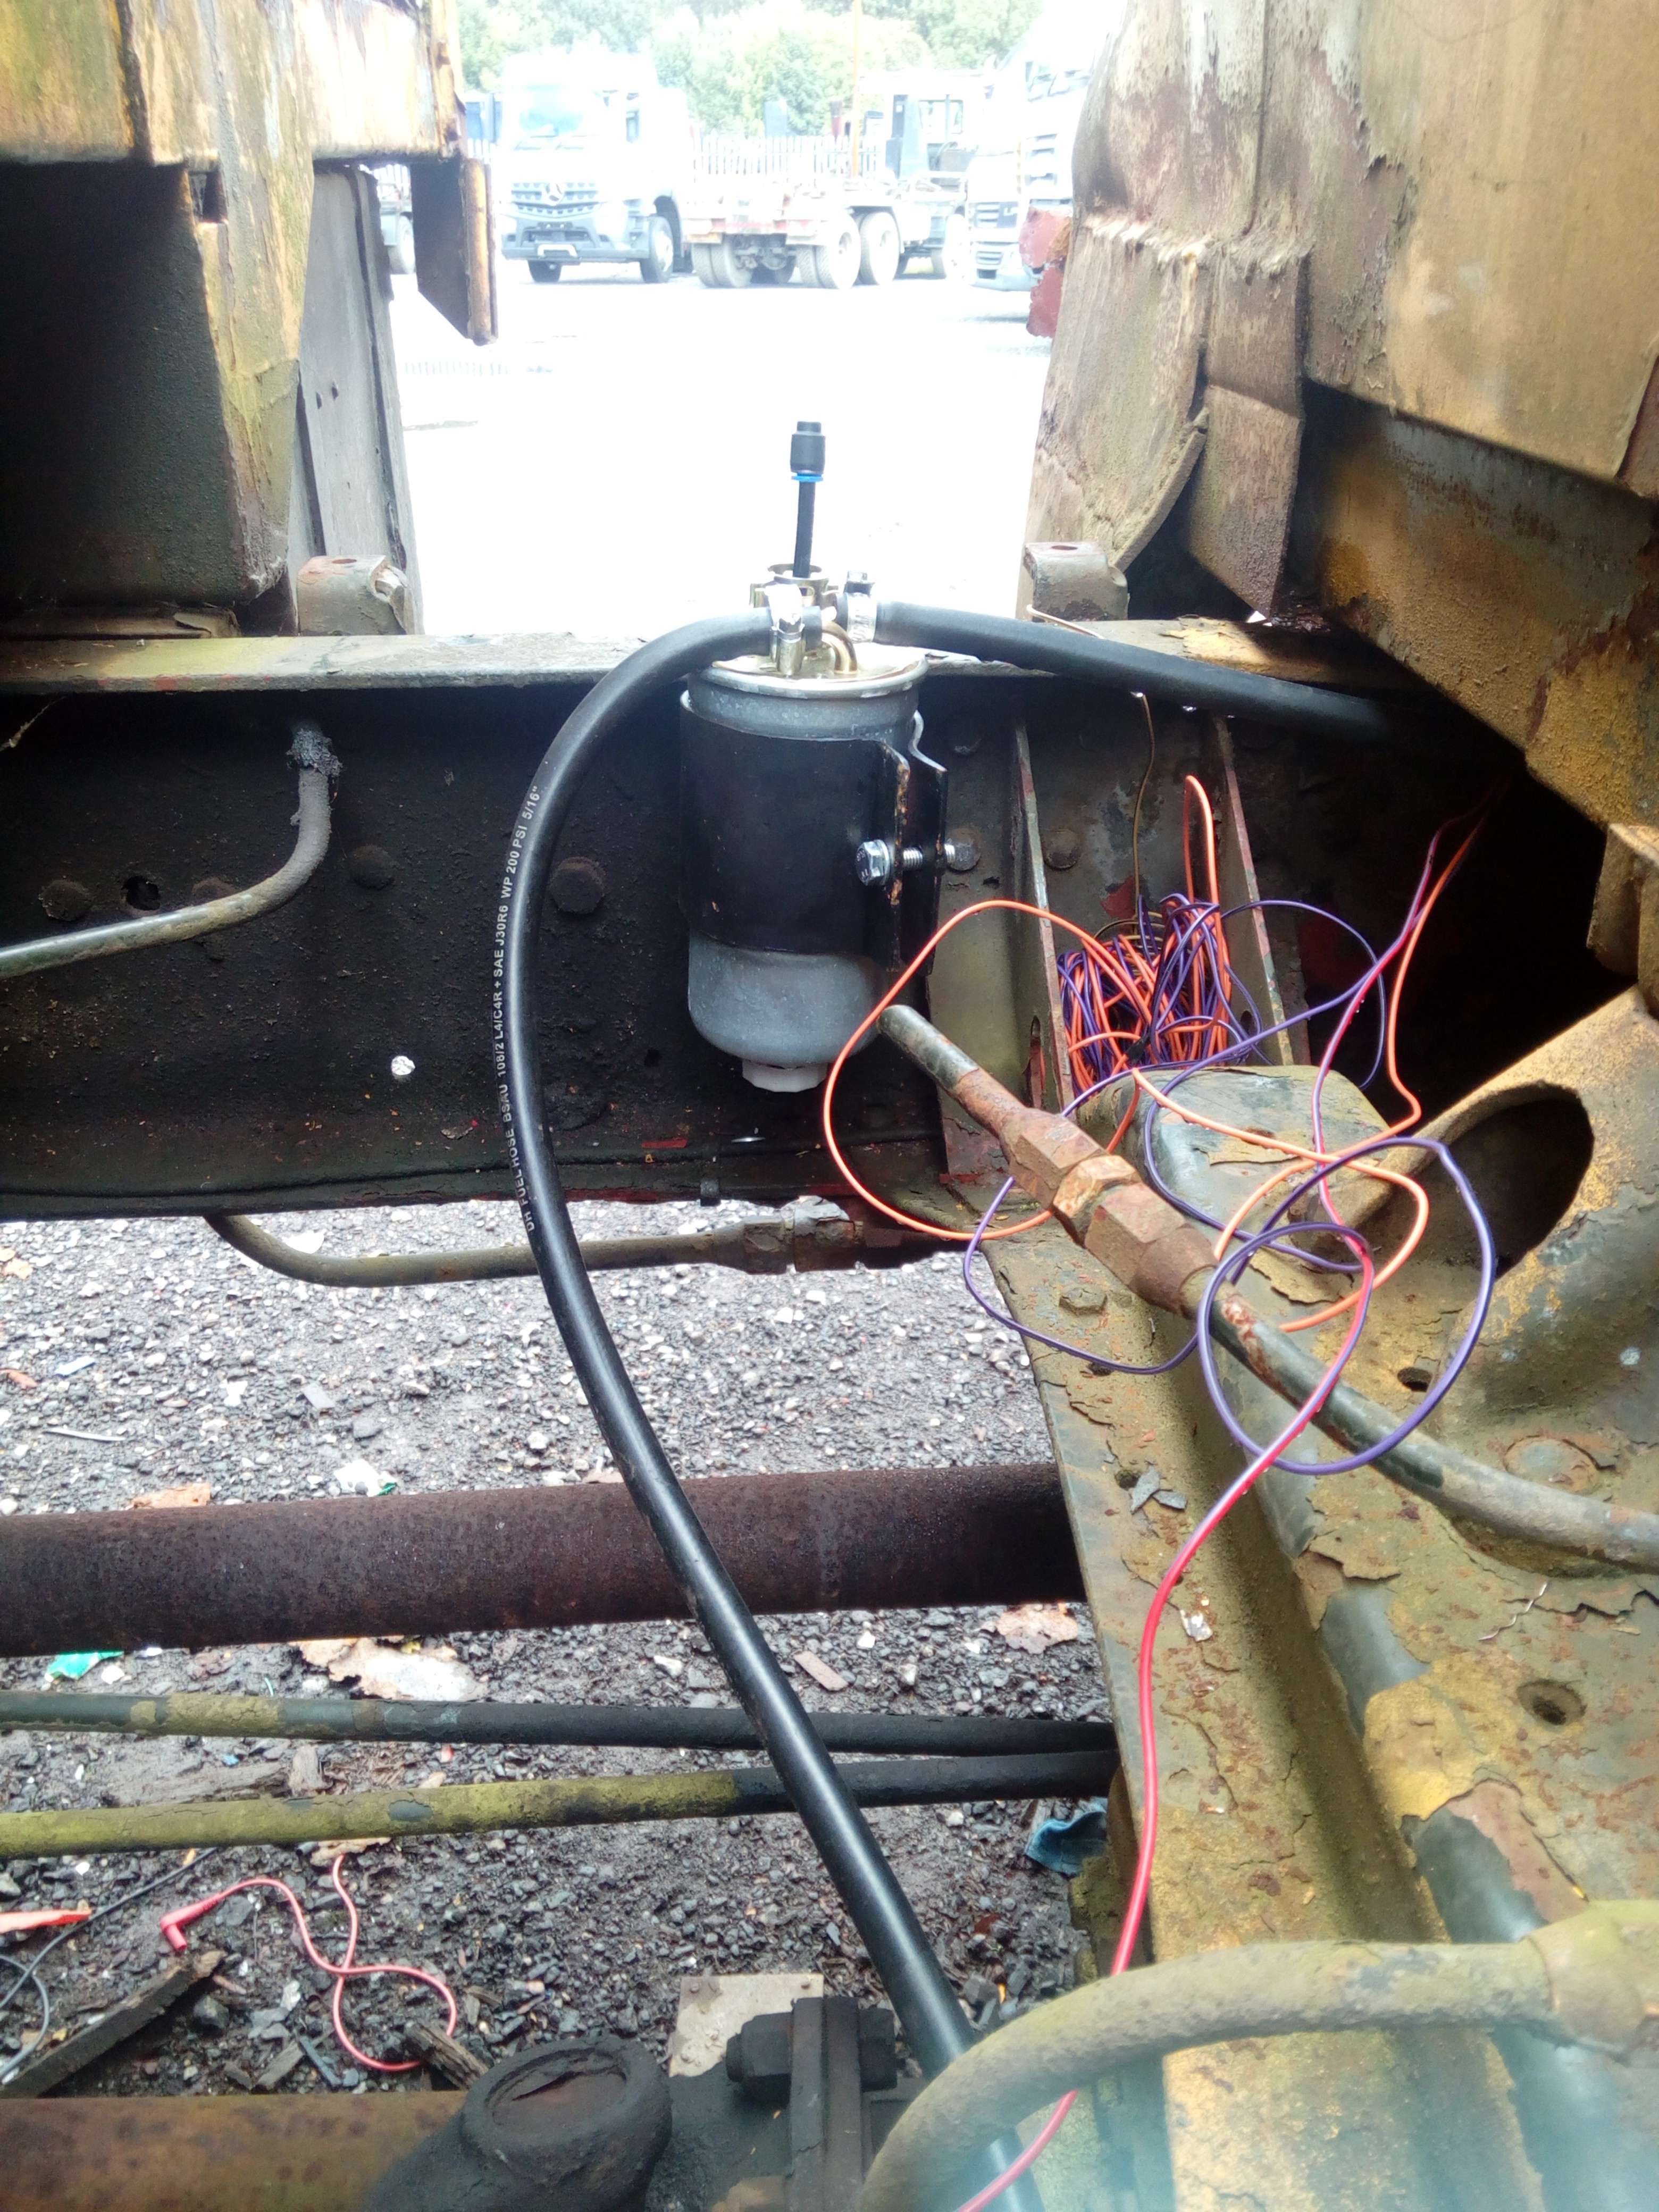 Photograph of the bracket bolted to the inside of the truck
shassis, with the filter stuffed into it and fuel lines
connected. Sticking out of the top of the fuel filter is a short
length of plastic pipe with a blanking cap on it. Piled up in the
chassis next to the filter is a large bundle of coloured wire.